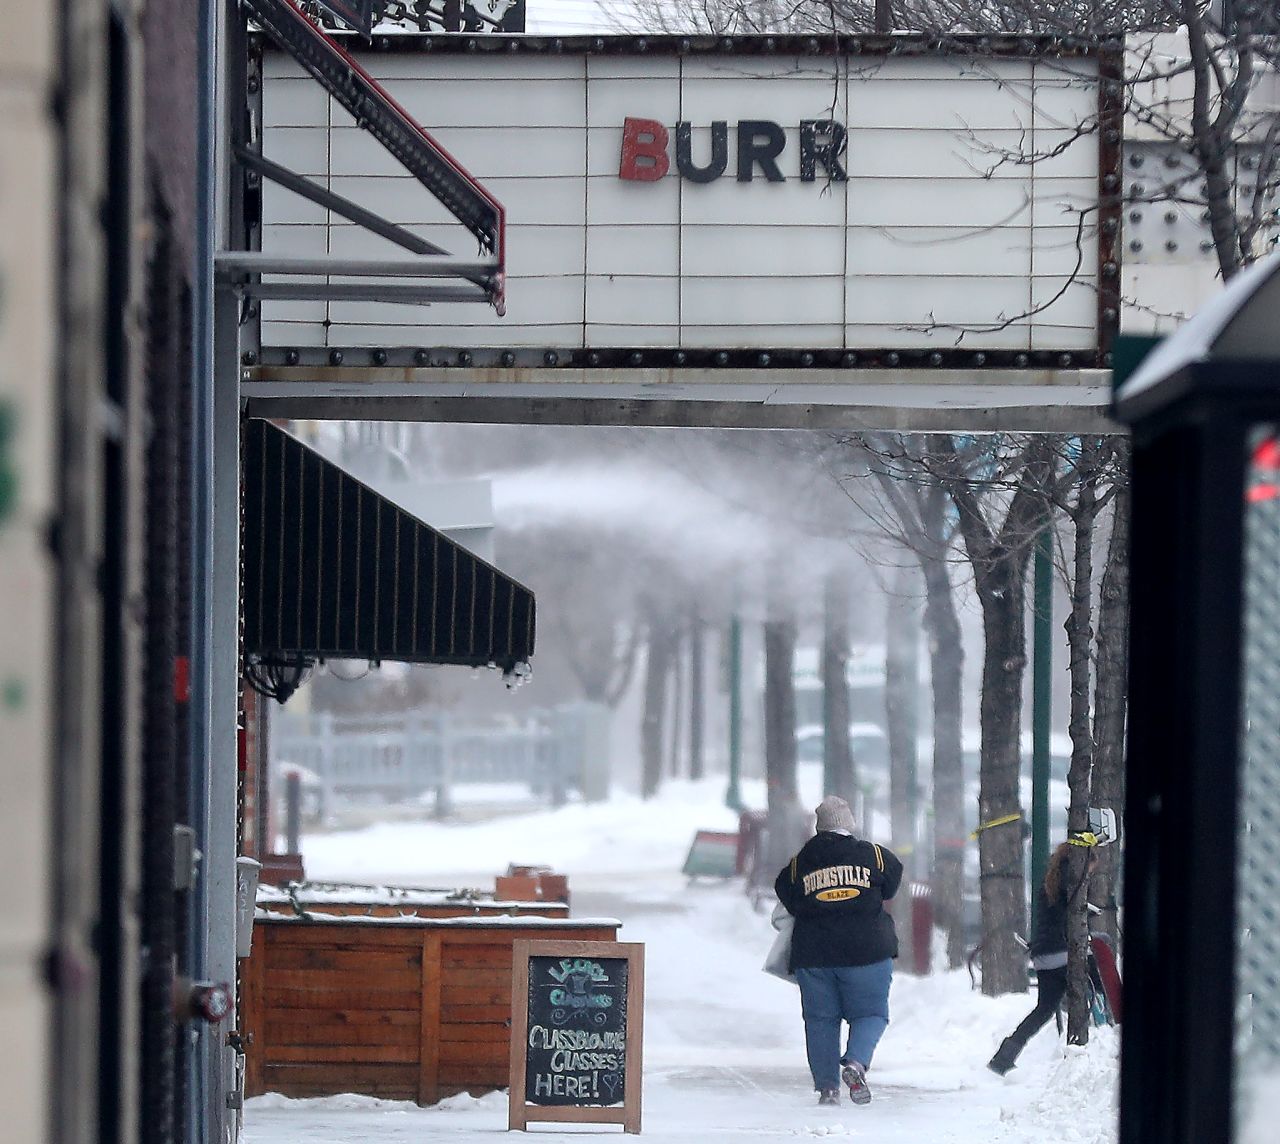 The inscription on a business marquee reads "BURR" in Minneapolis.